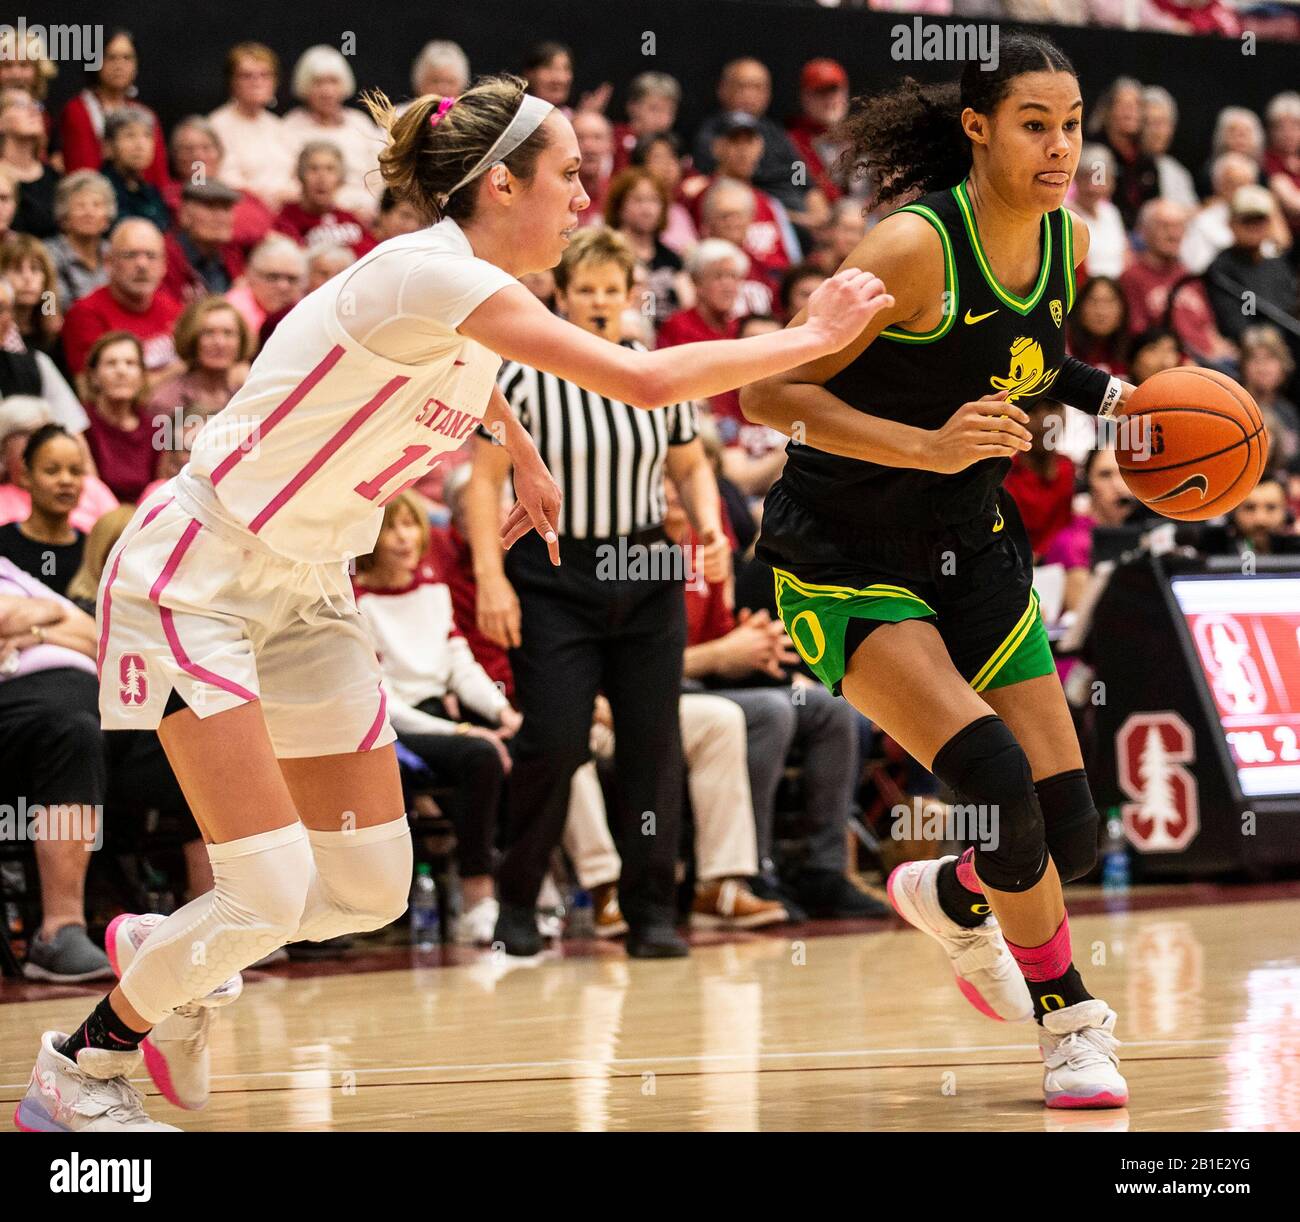 Stanford, CA, USA. 24th Feb, 2020. A. Oregon Ducks forward Satou Sabally (0) drives to the hoop during the NCAA Women's Basketball game between Oregon Ducks and the Stanford Cardinal 74-66 win at Maples Pavilion Stanford, CA. Thurman James /CSM/Alamy Live News Stock Photo